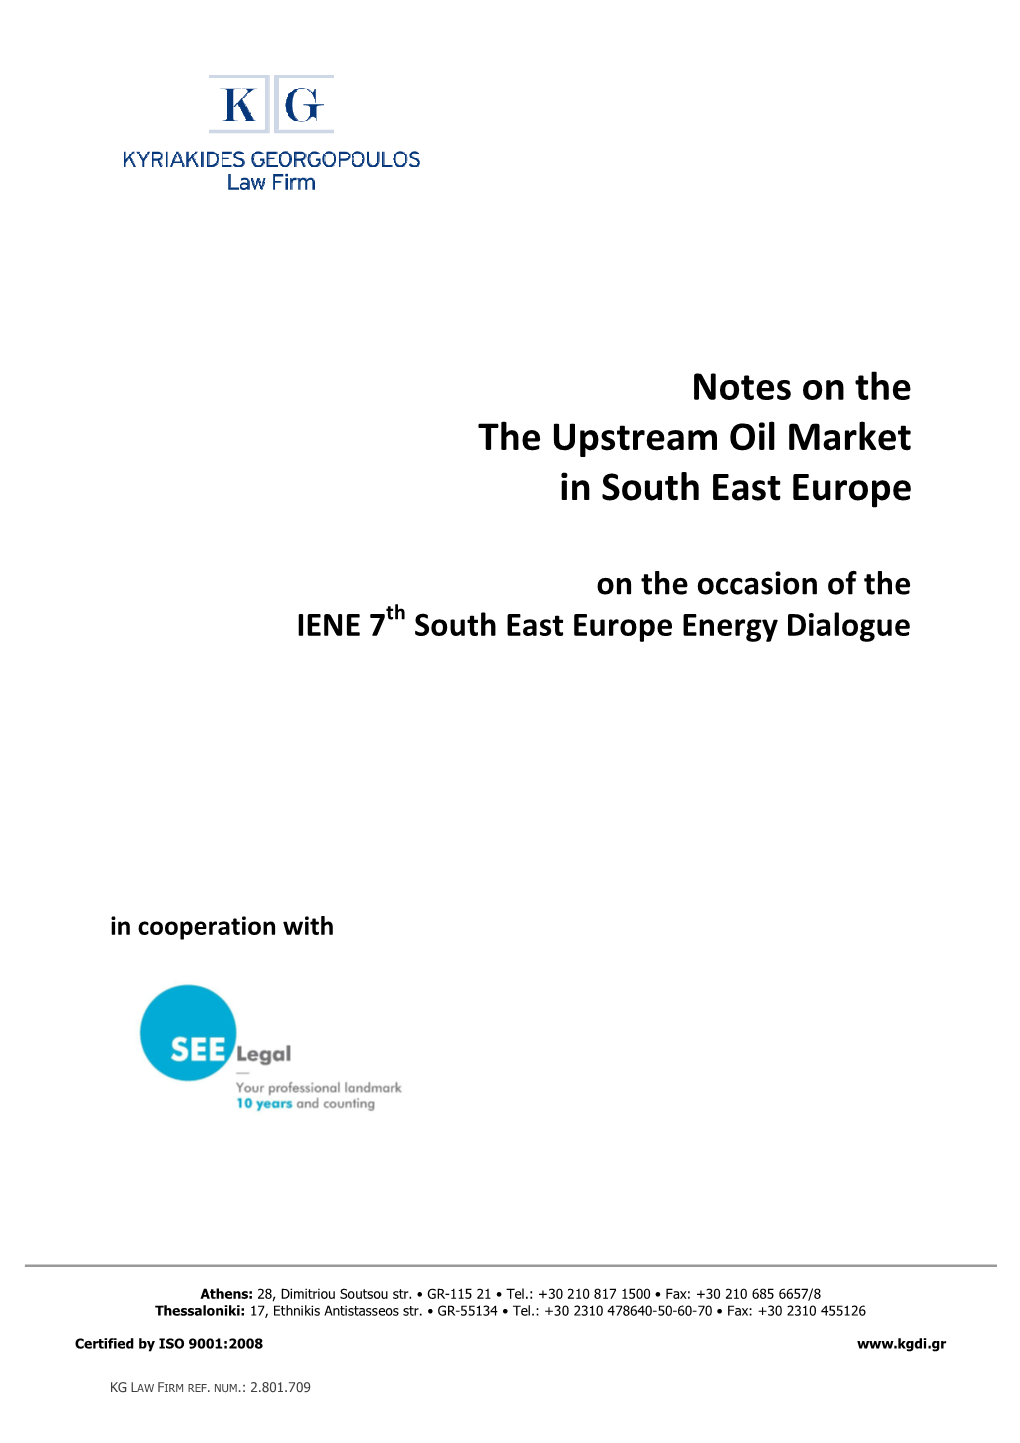 Notes on the the Upstream Oil Market in South East Europe